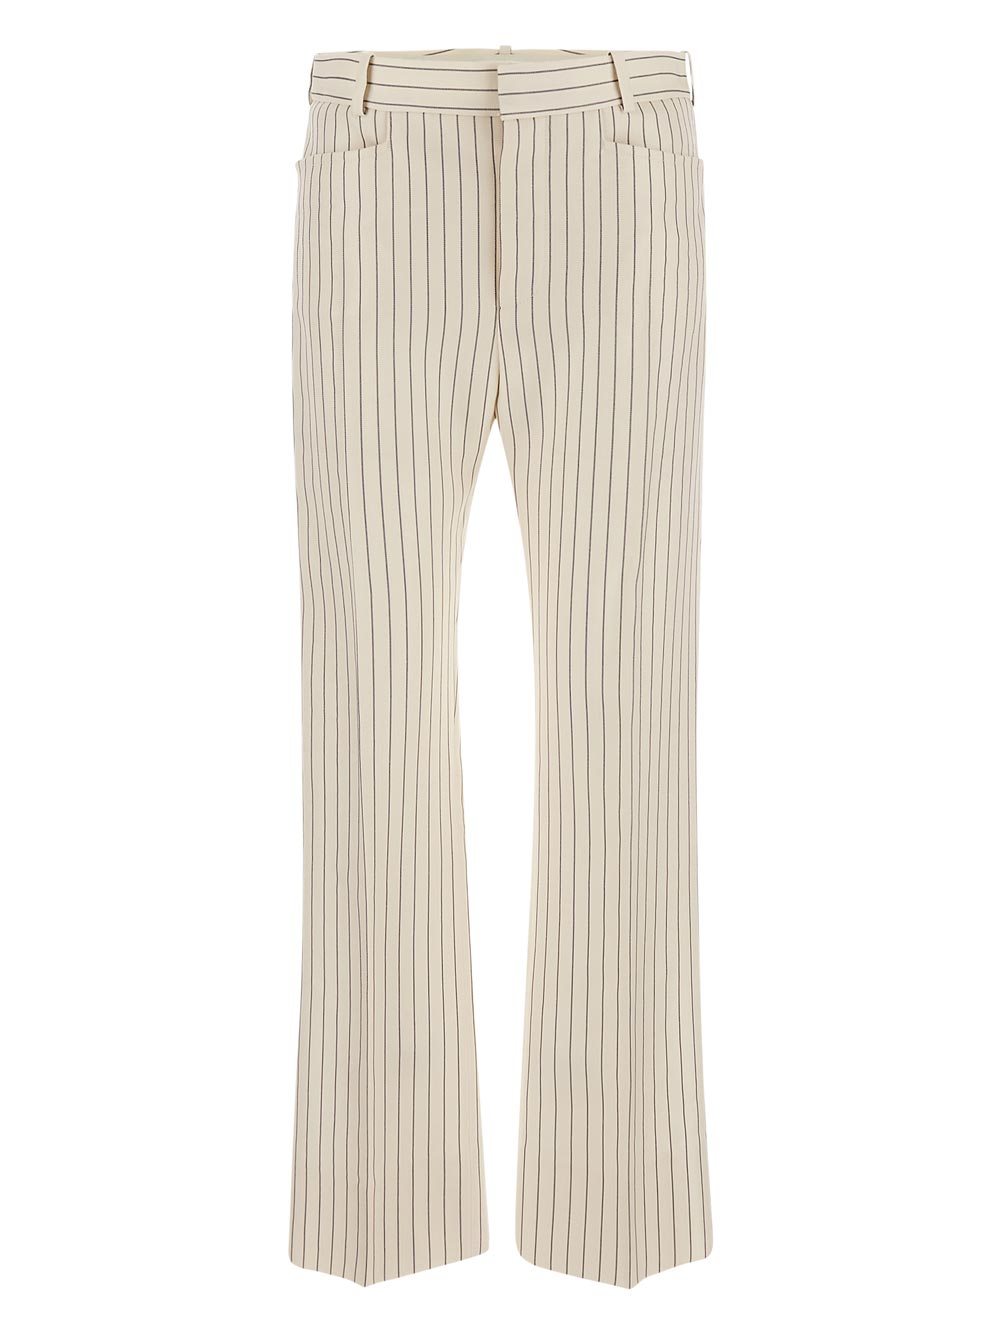 Tom Ford Striped Wool And Silk Blend "Wallis" Tailored Pants